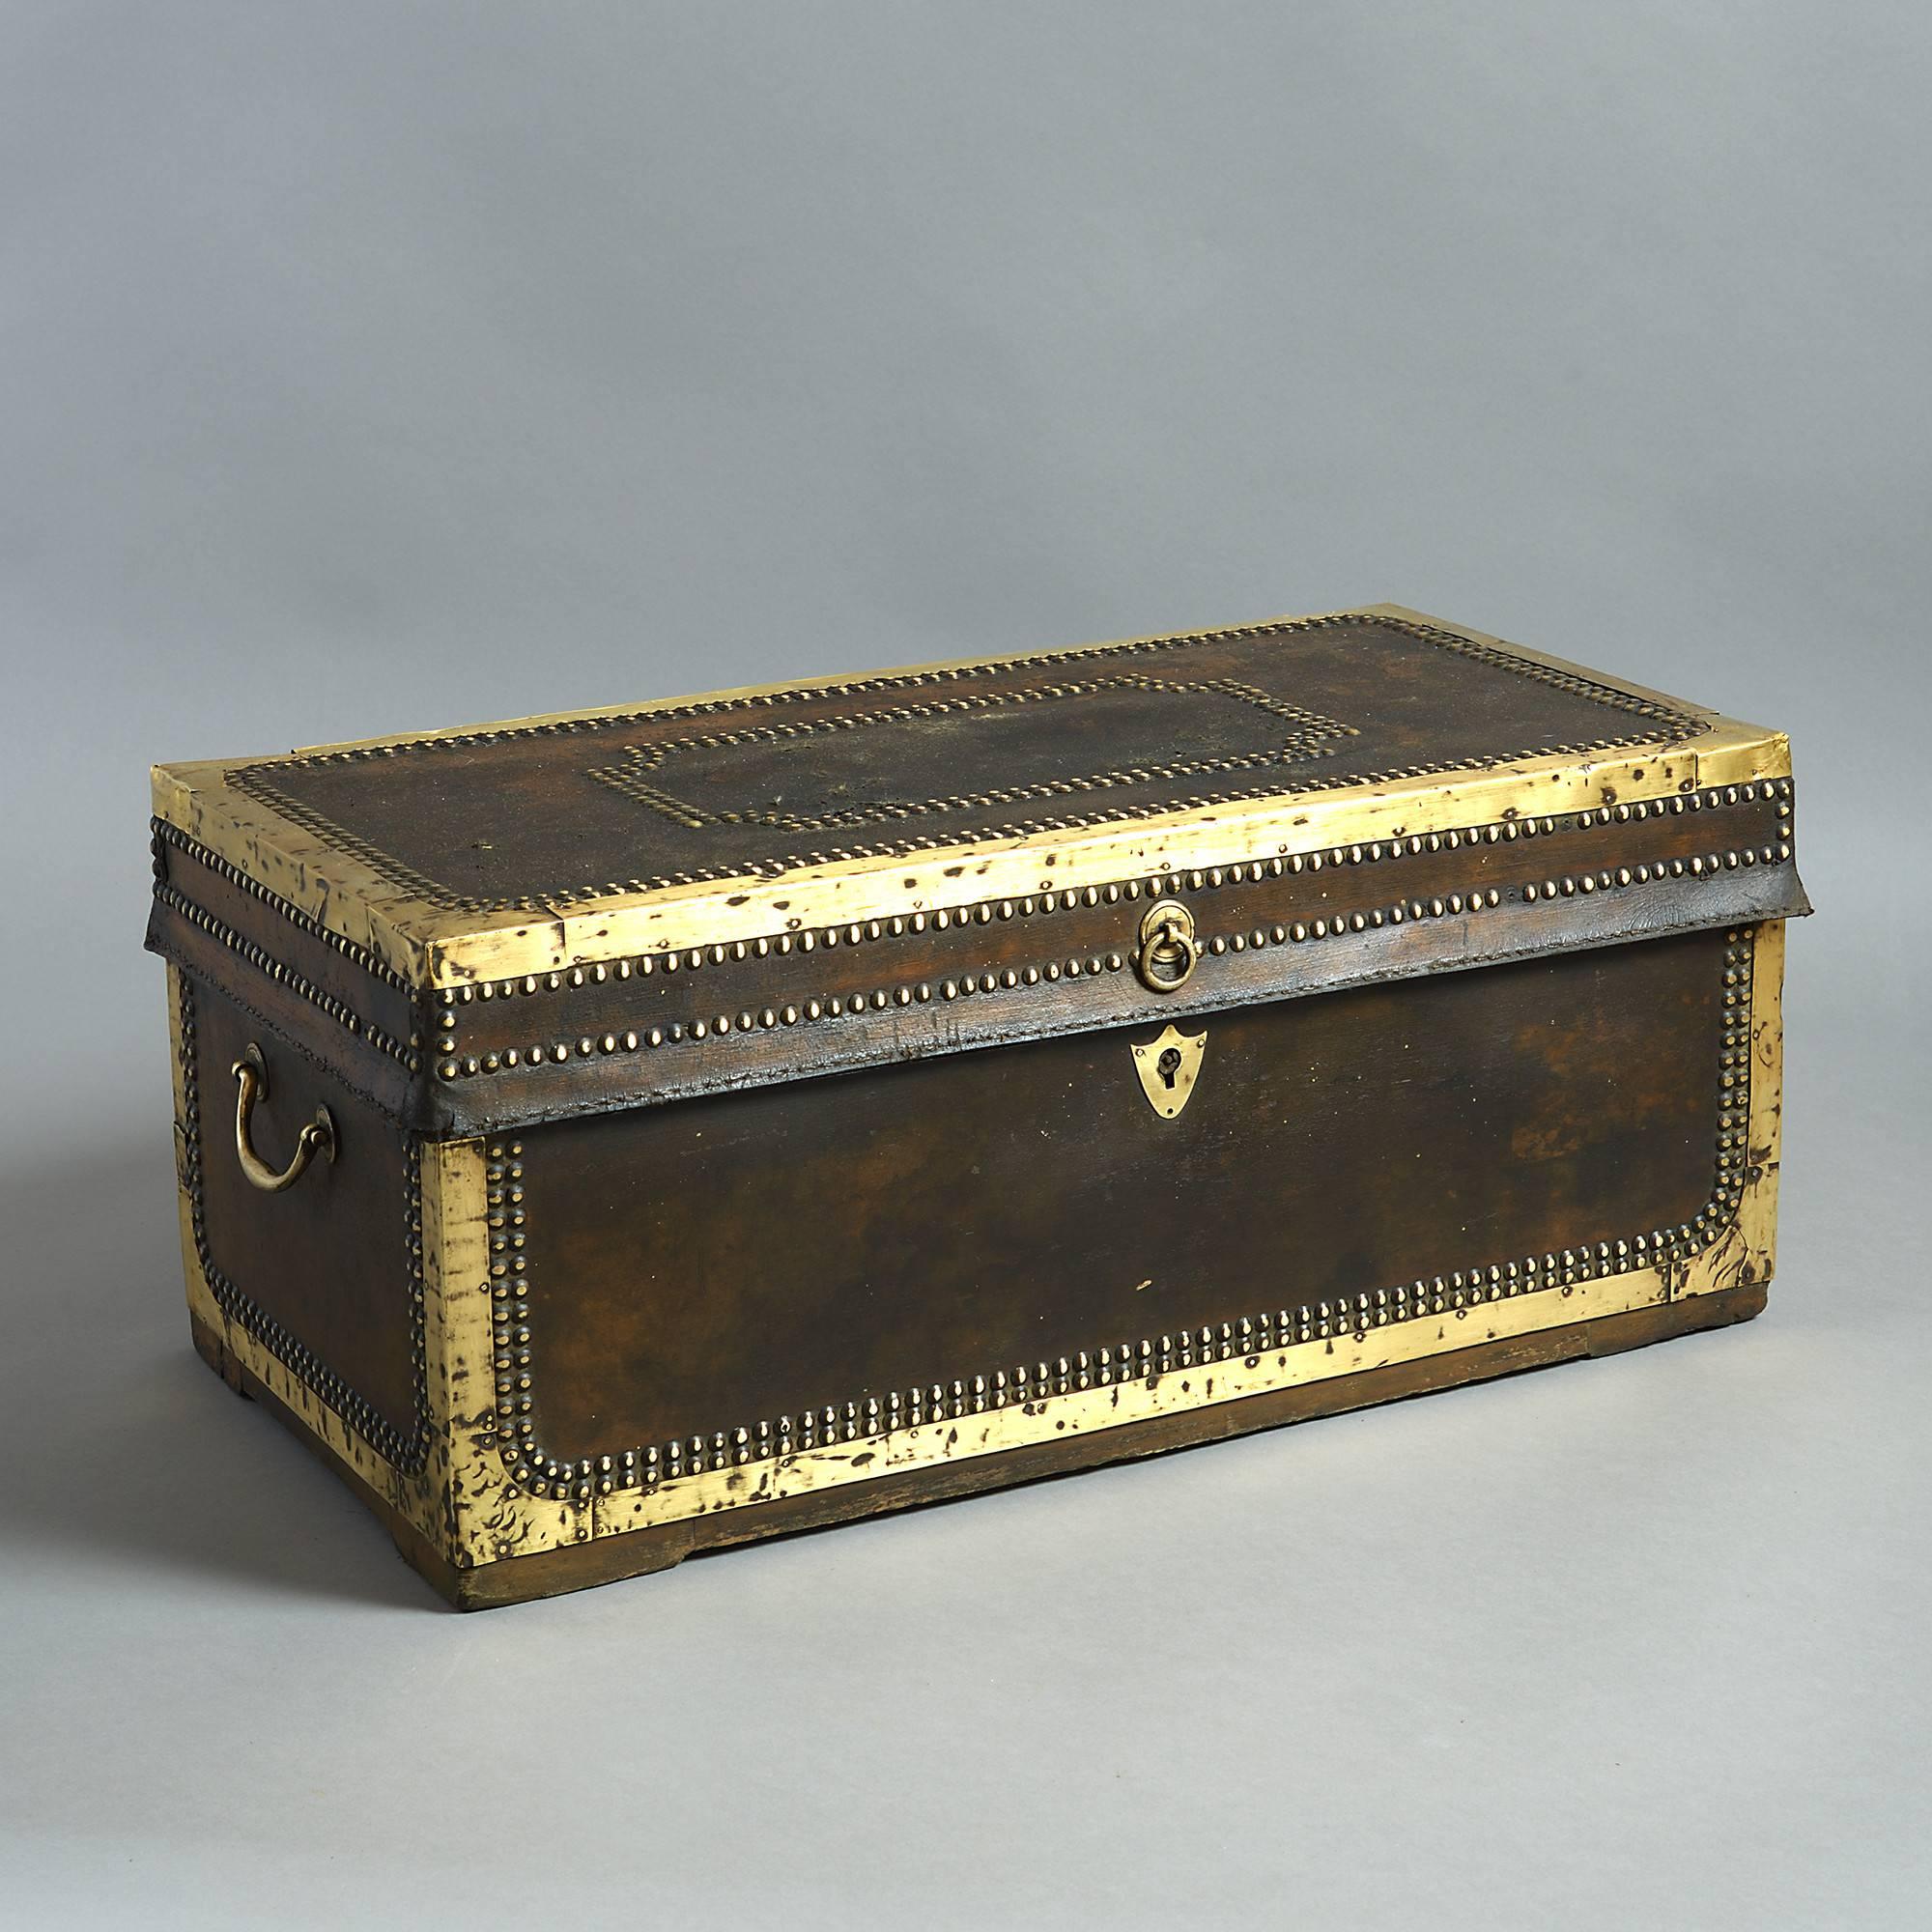 A good early 19th century leather travelling trunk, with panelled brass studding and having two carrying handles, lined with camphor wood and retaining an early retailer's label for Charles Hawkins, 86, Strand, London.